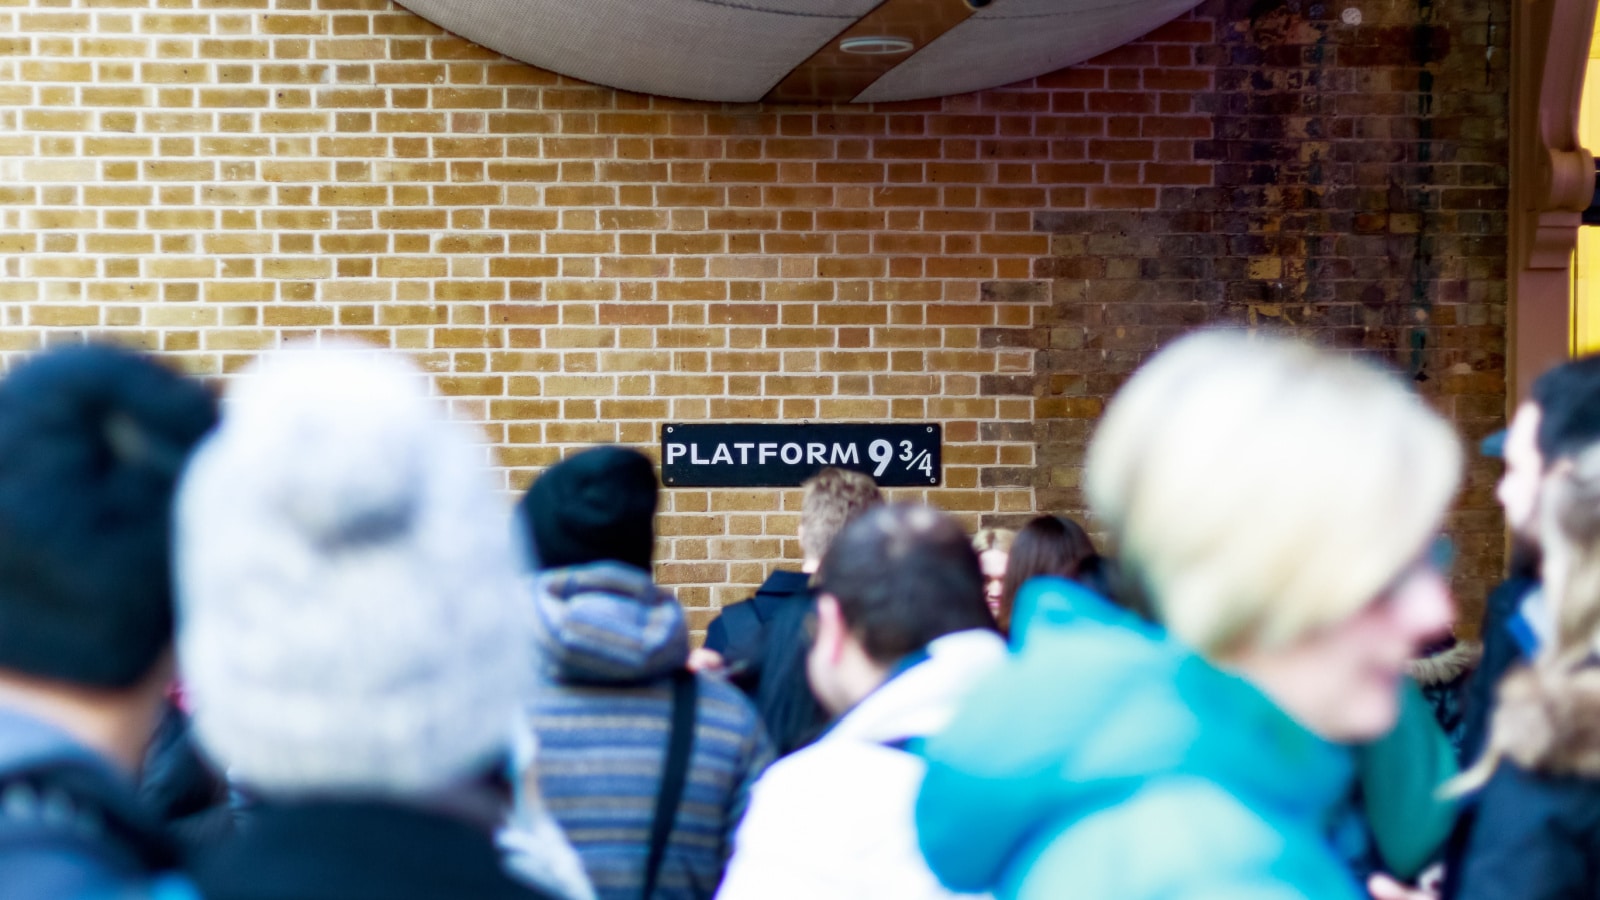 London, UK - February 28, 2017 - Platform 9 3/4 from Harry Potter at King's Cross station seen through queuing crowd